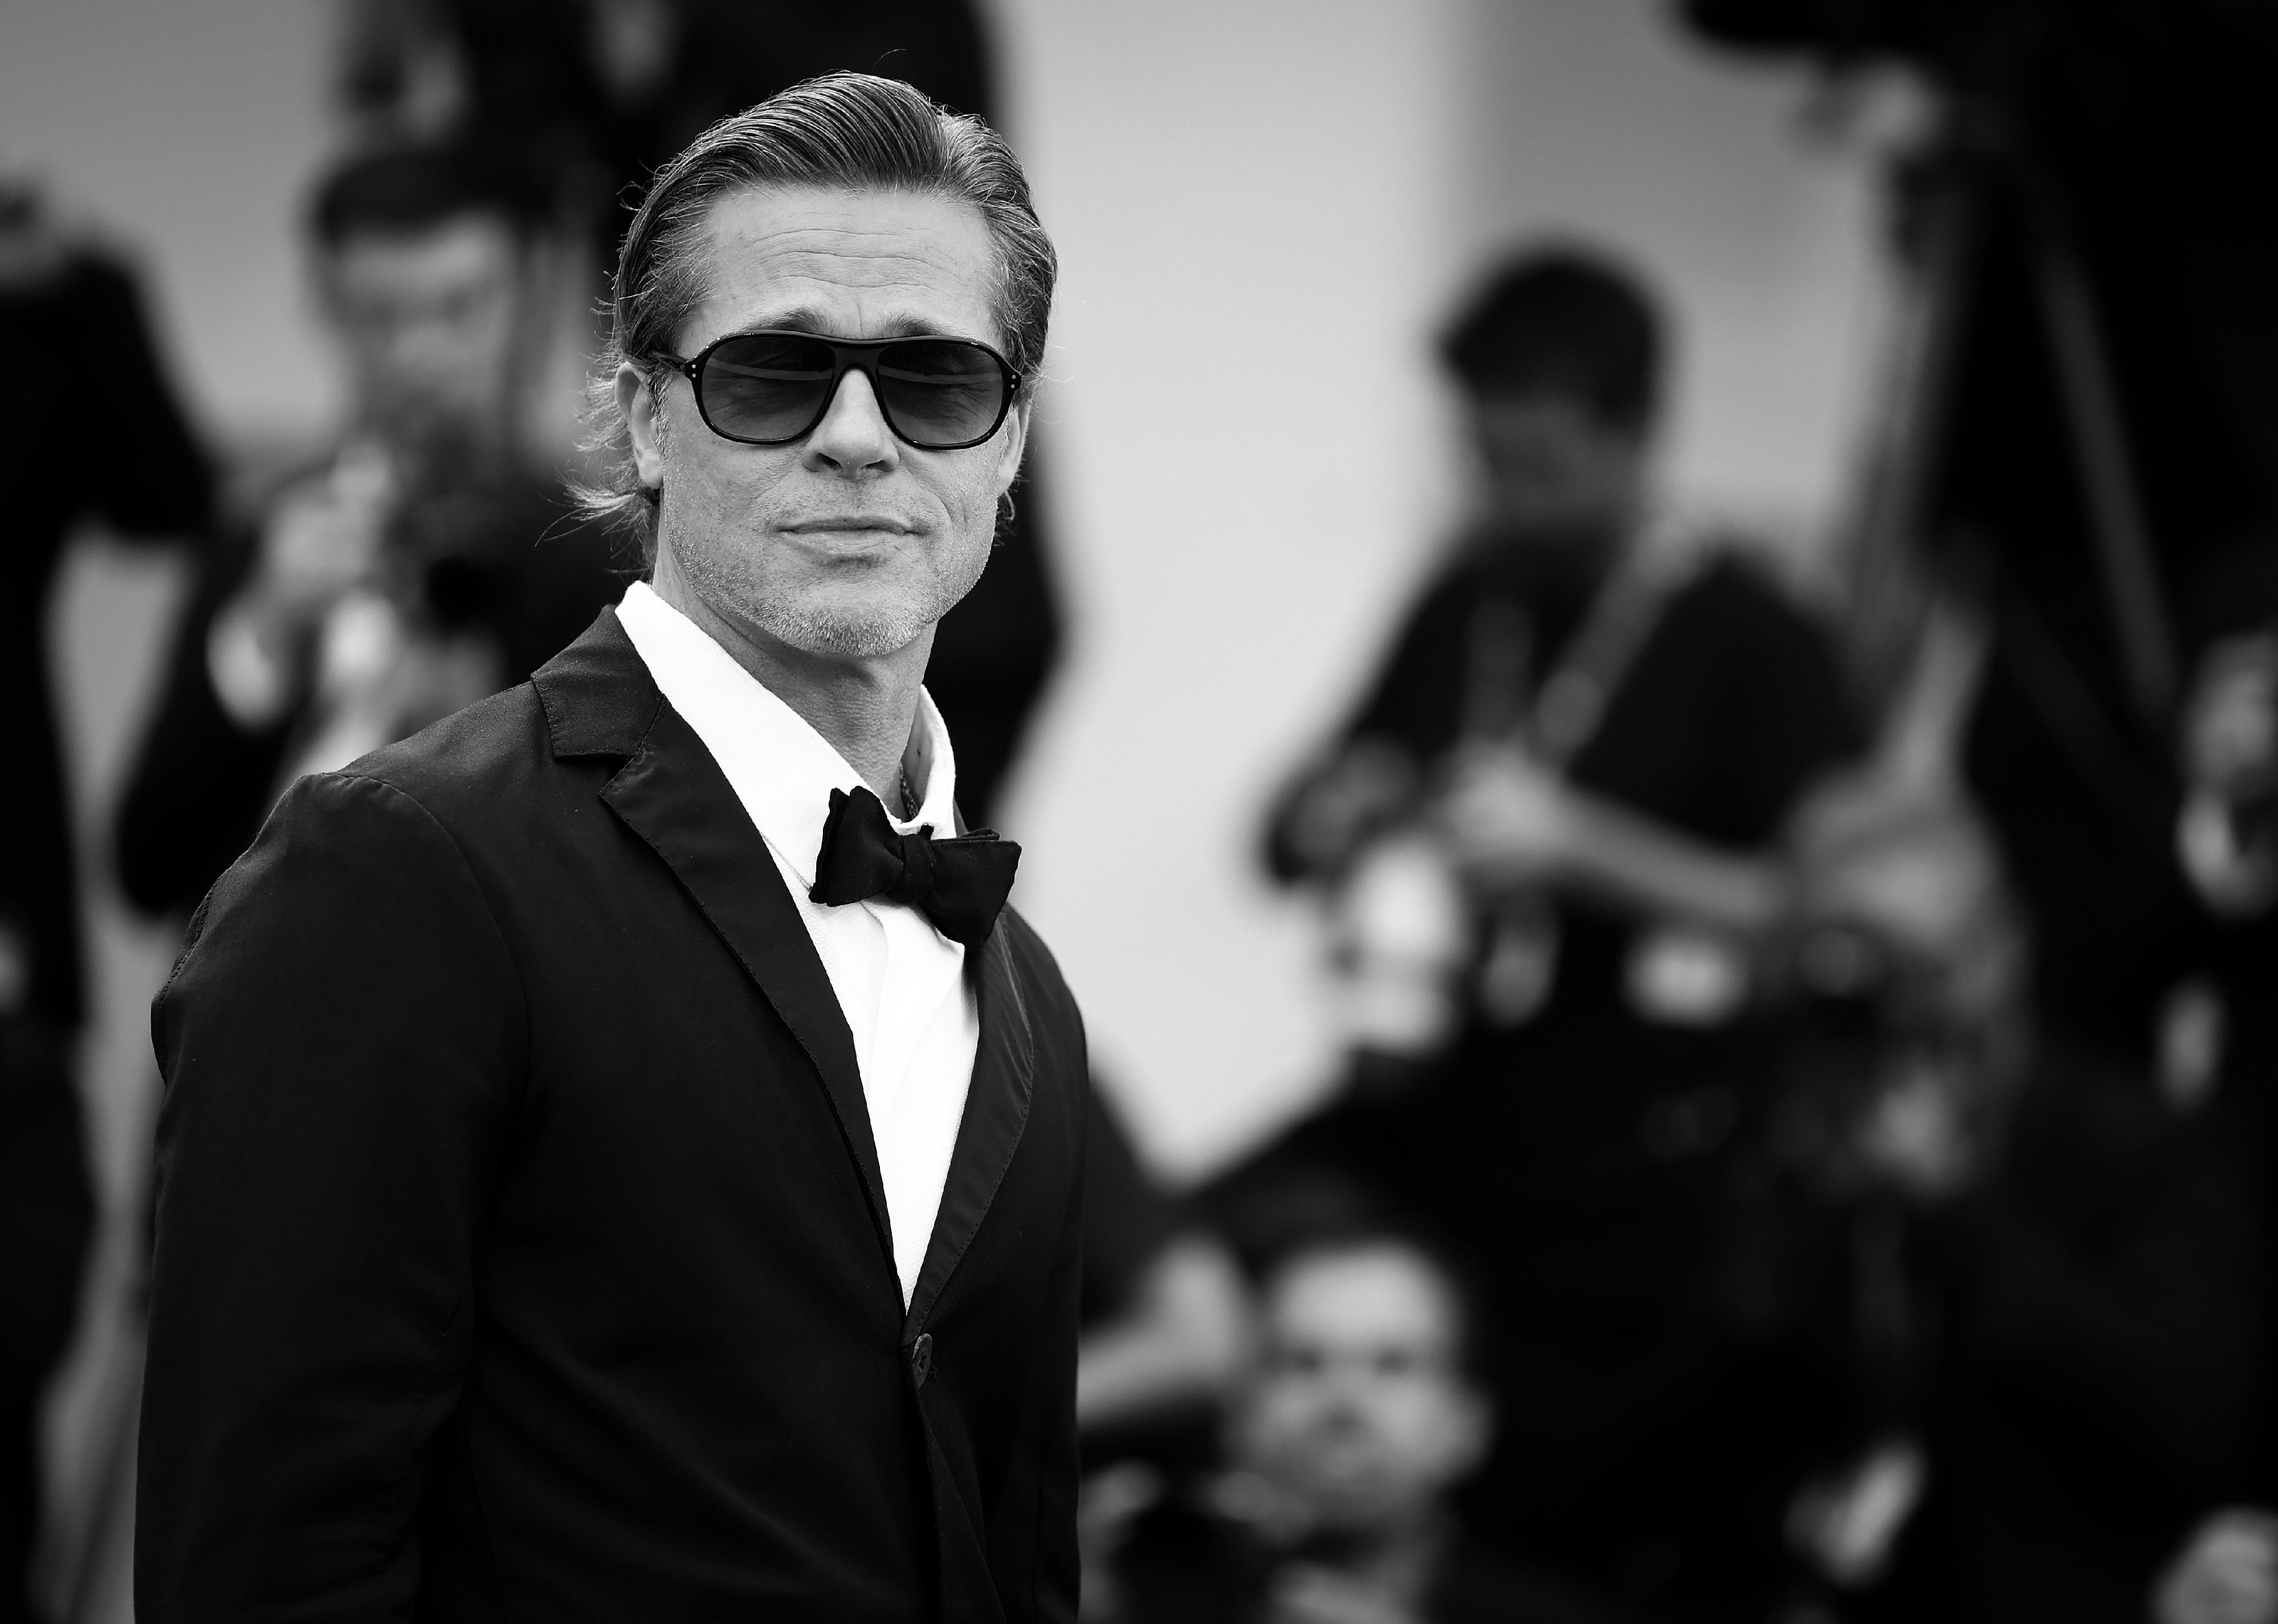 Brad Pitt in a black suit and bowtie.